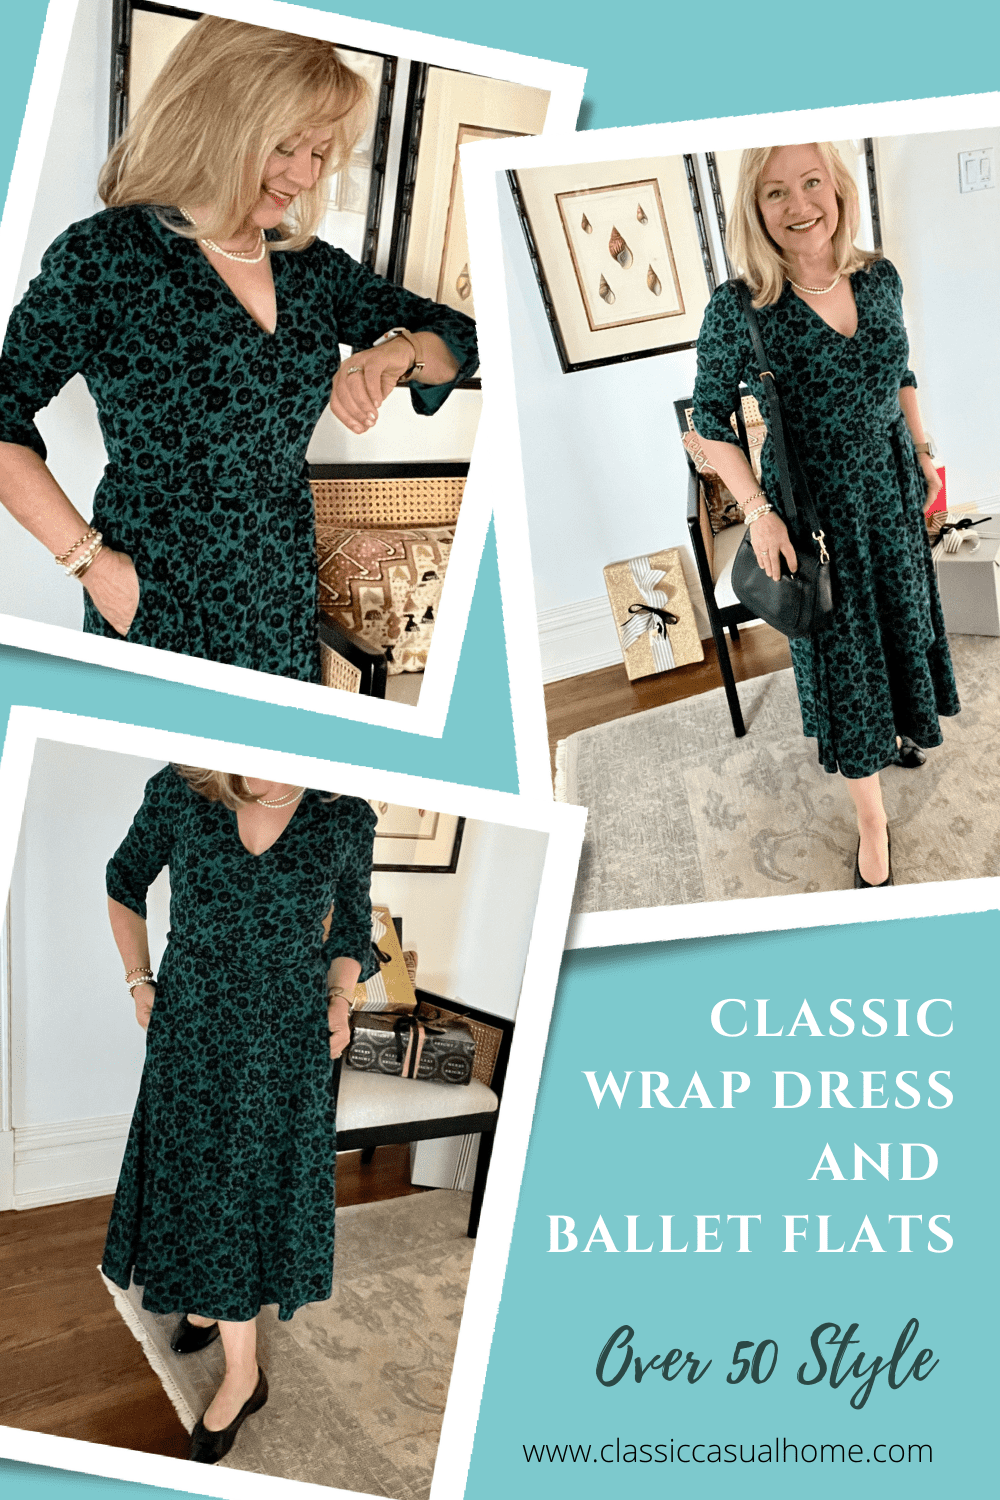 Wrap Dress For Casual Holiday Parties worn by Mary Ann Pickett